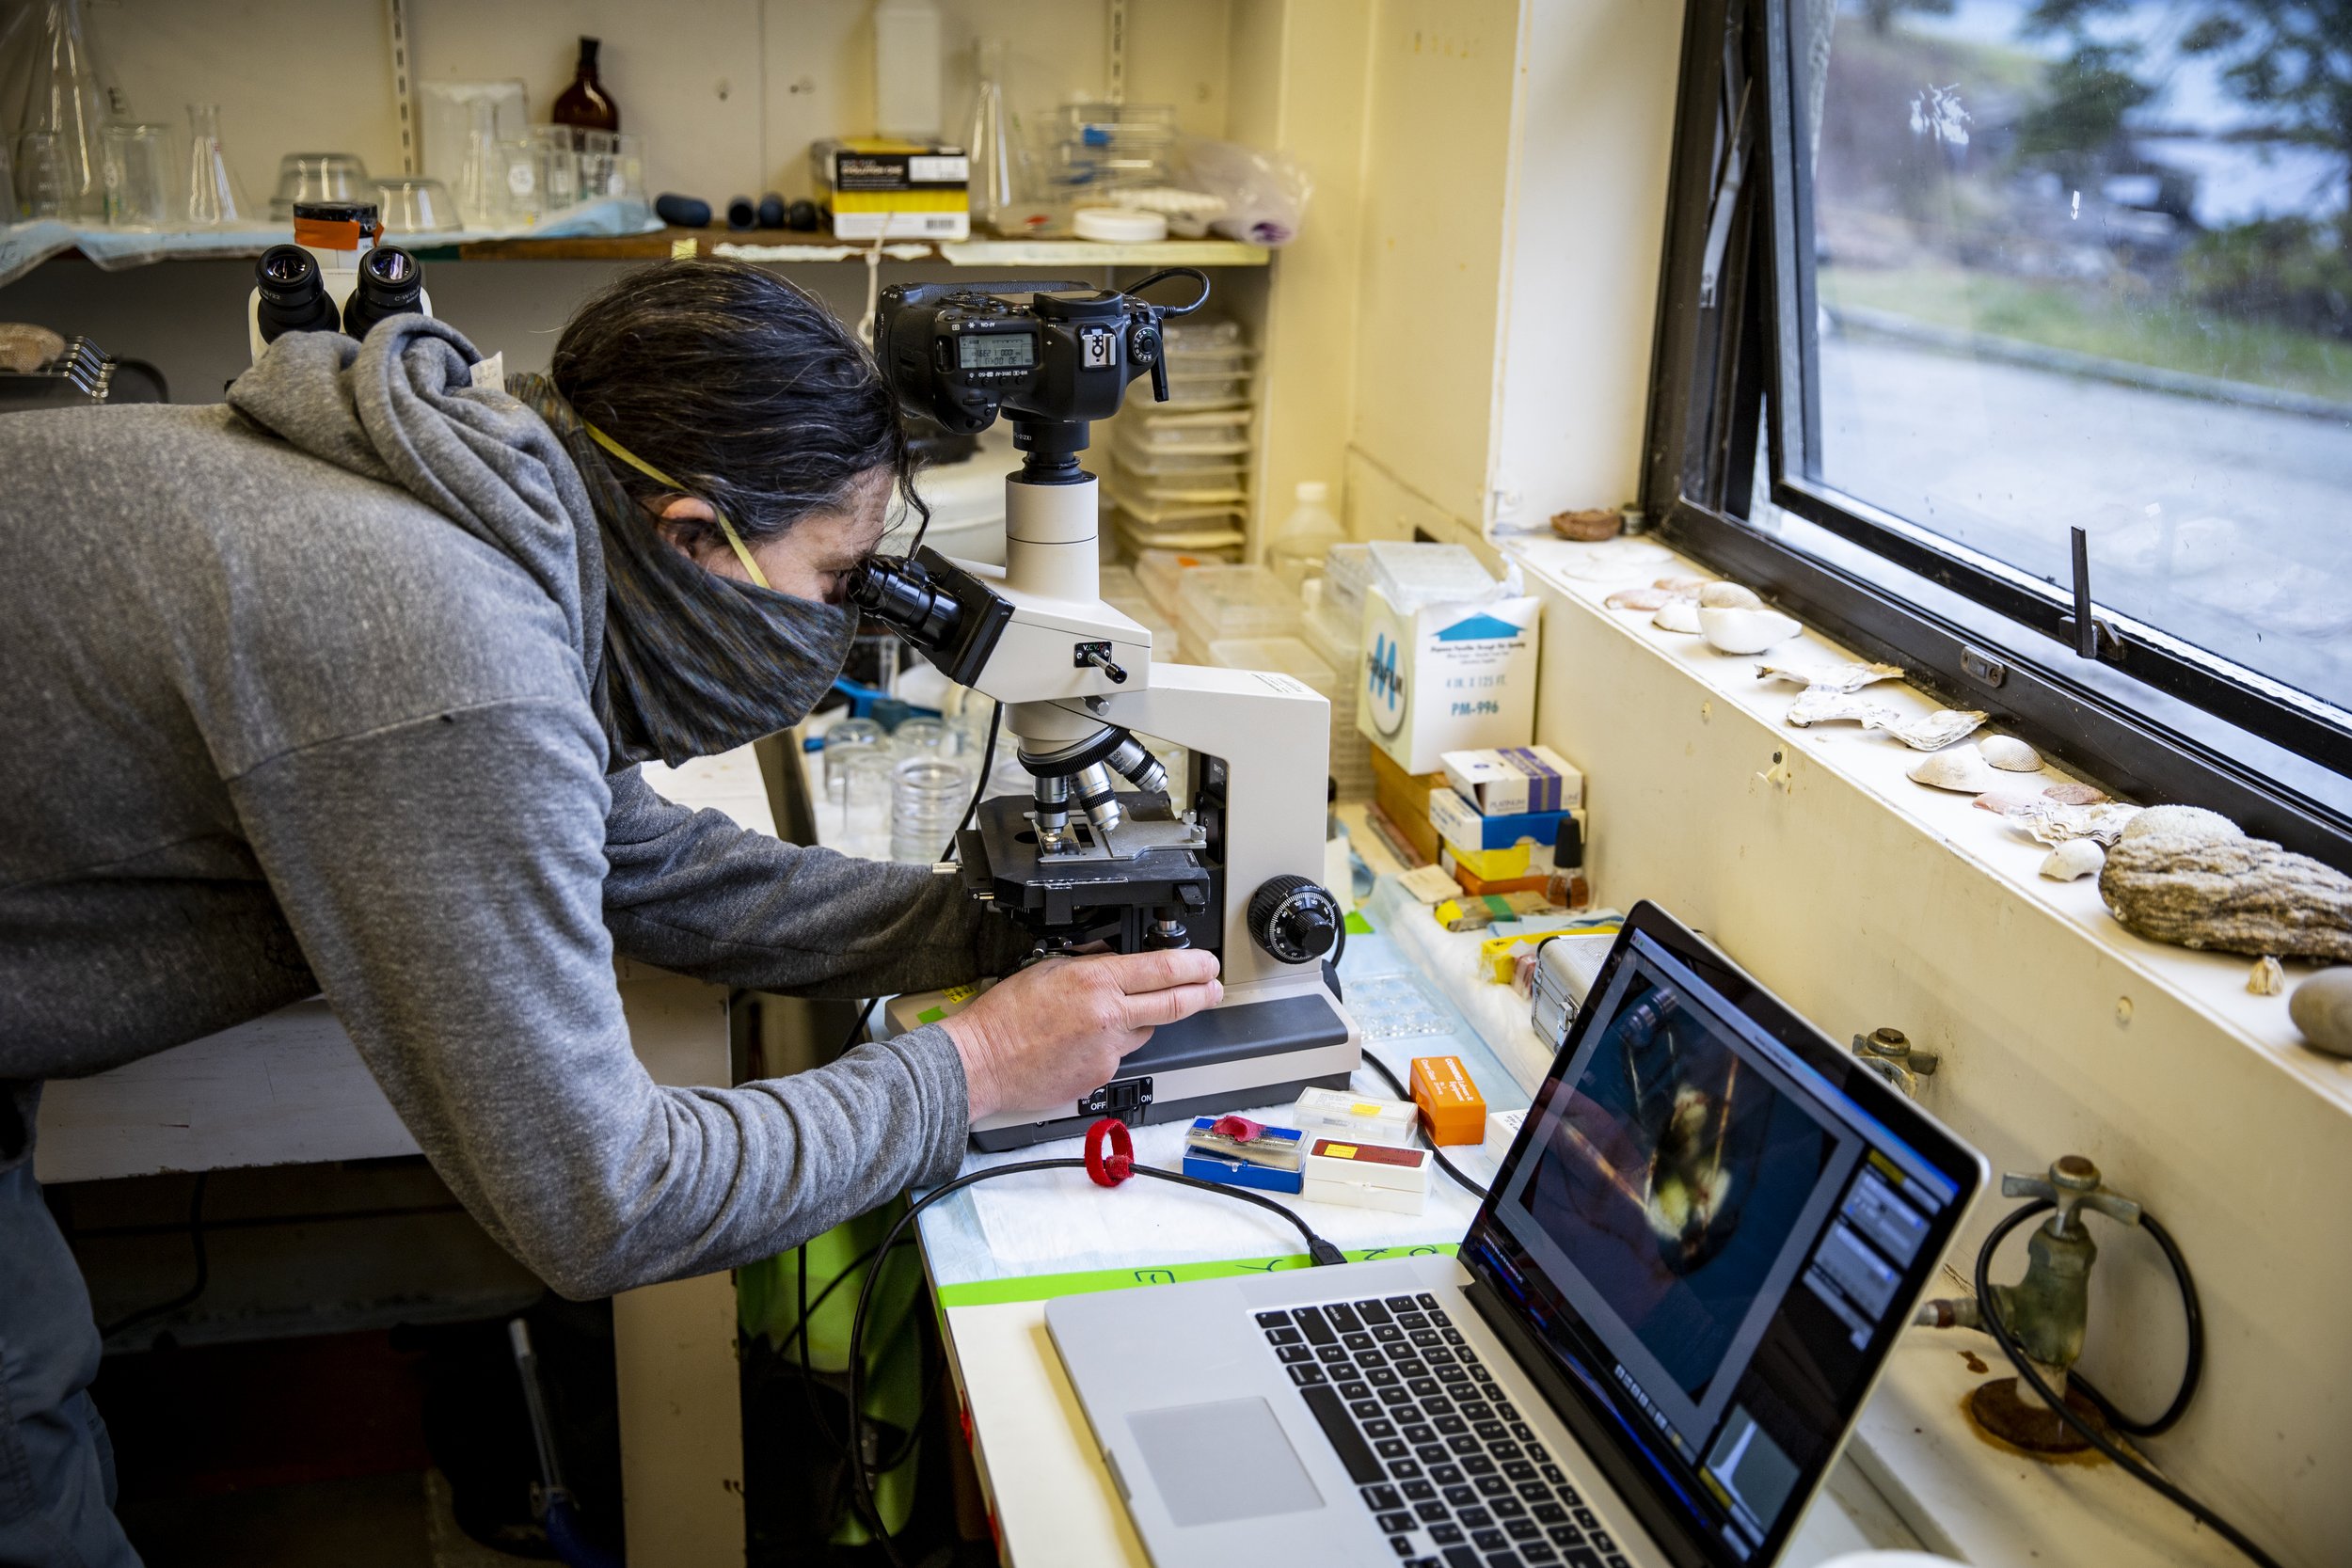   Jason Hodin, research scientist at UW Friday Harbor Laboratories, examines larvae under a microscope in the sea star captive rearing lab. The sunflower sea star captive breeding program is a partnership between University of Washington and The Natu